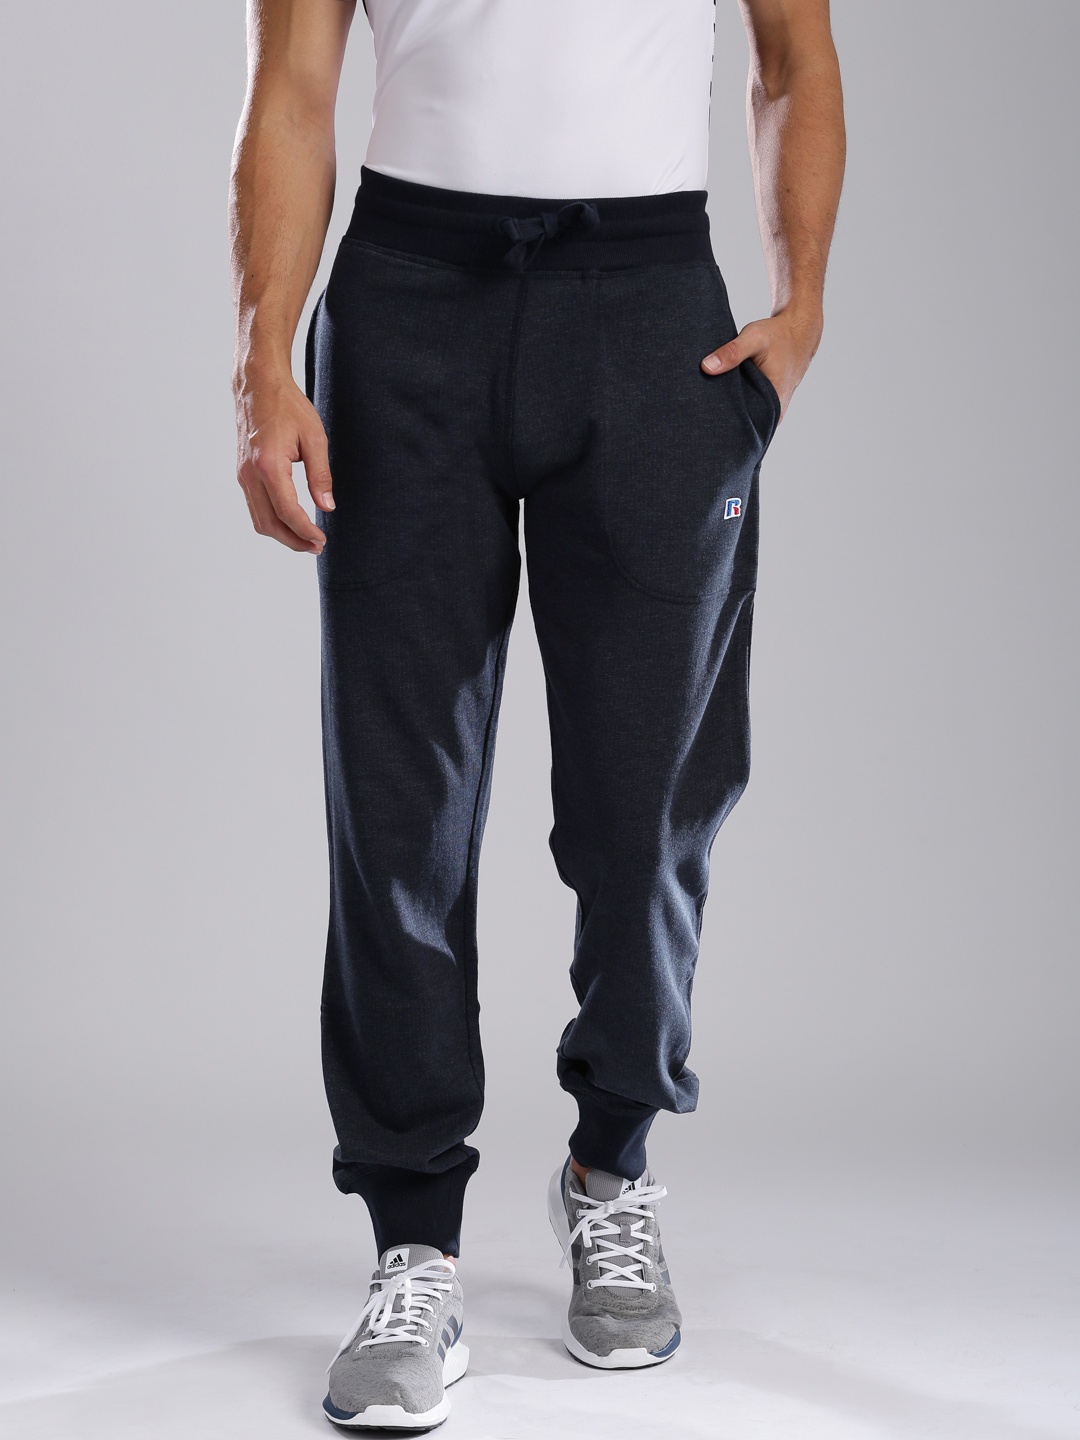 Russell Athletic Navy Track Pants price Myntra. Track Pants Deals at ...